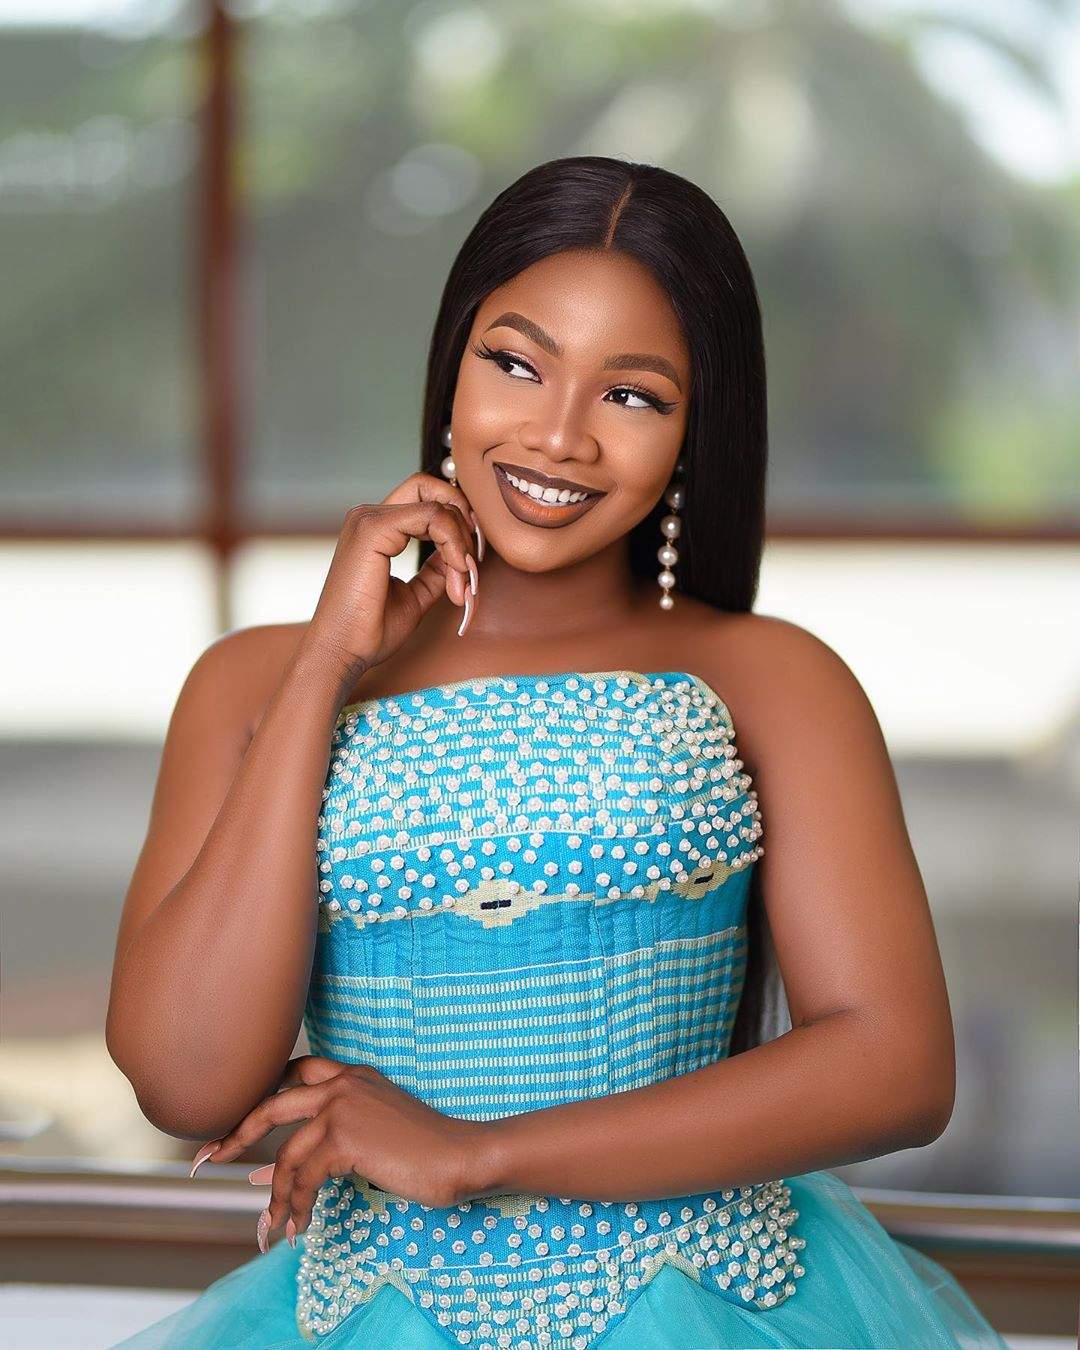 I'm not coming back to Nigeria. Lockdown in U.K is better - Symply Tacha